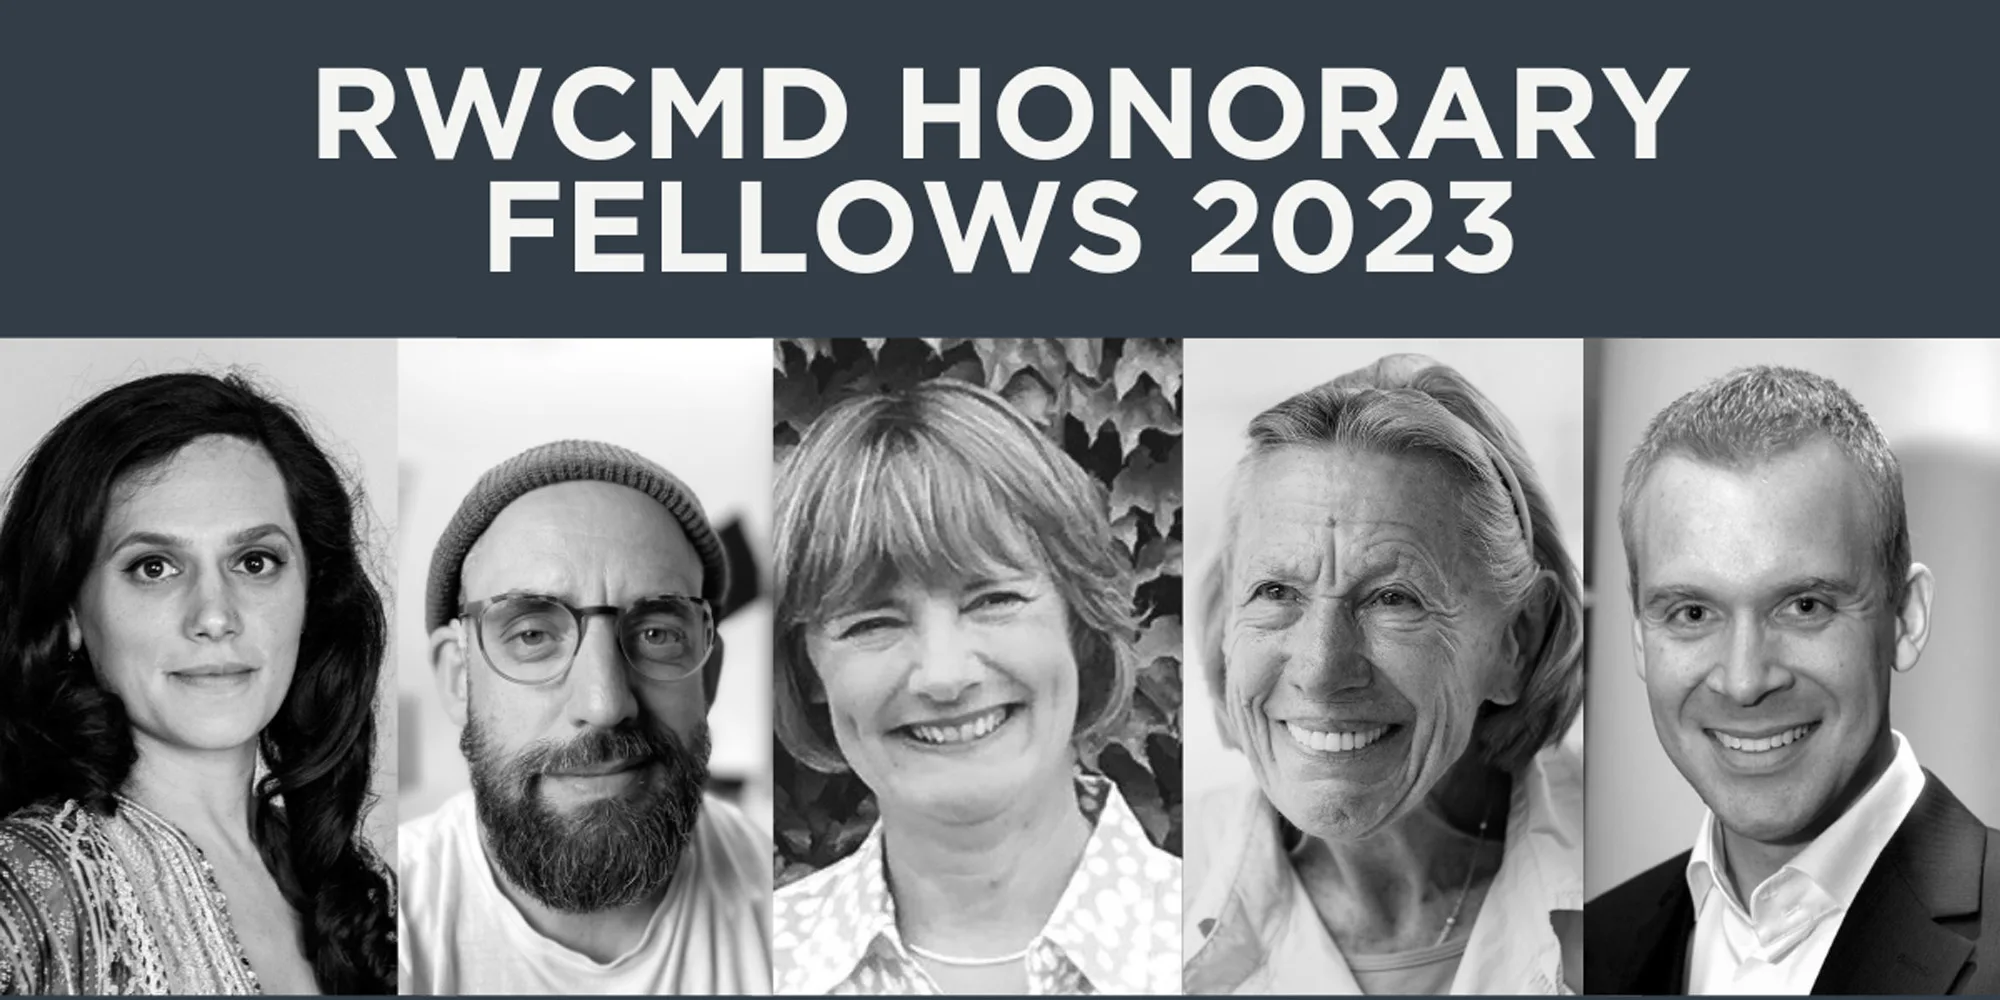 YOUR NEWS – YOUTH/STUDENT/GRADUATE – RWCMD Honorary Fellows 2023